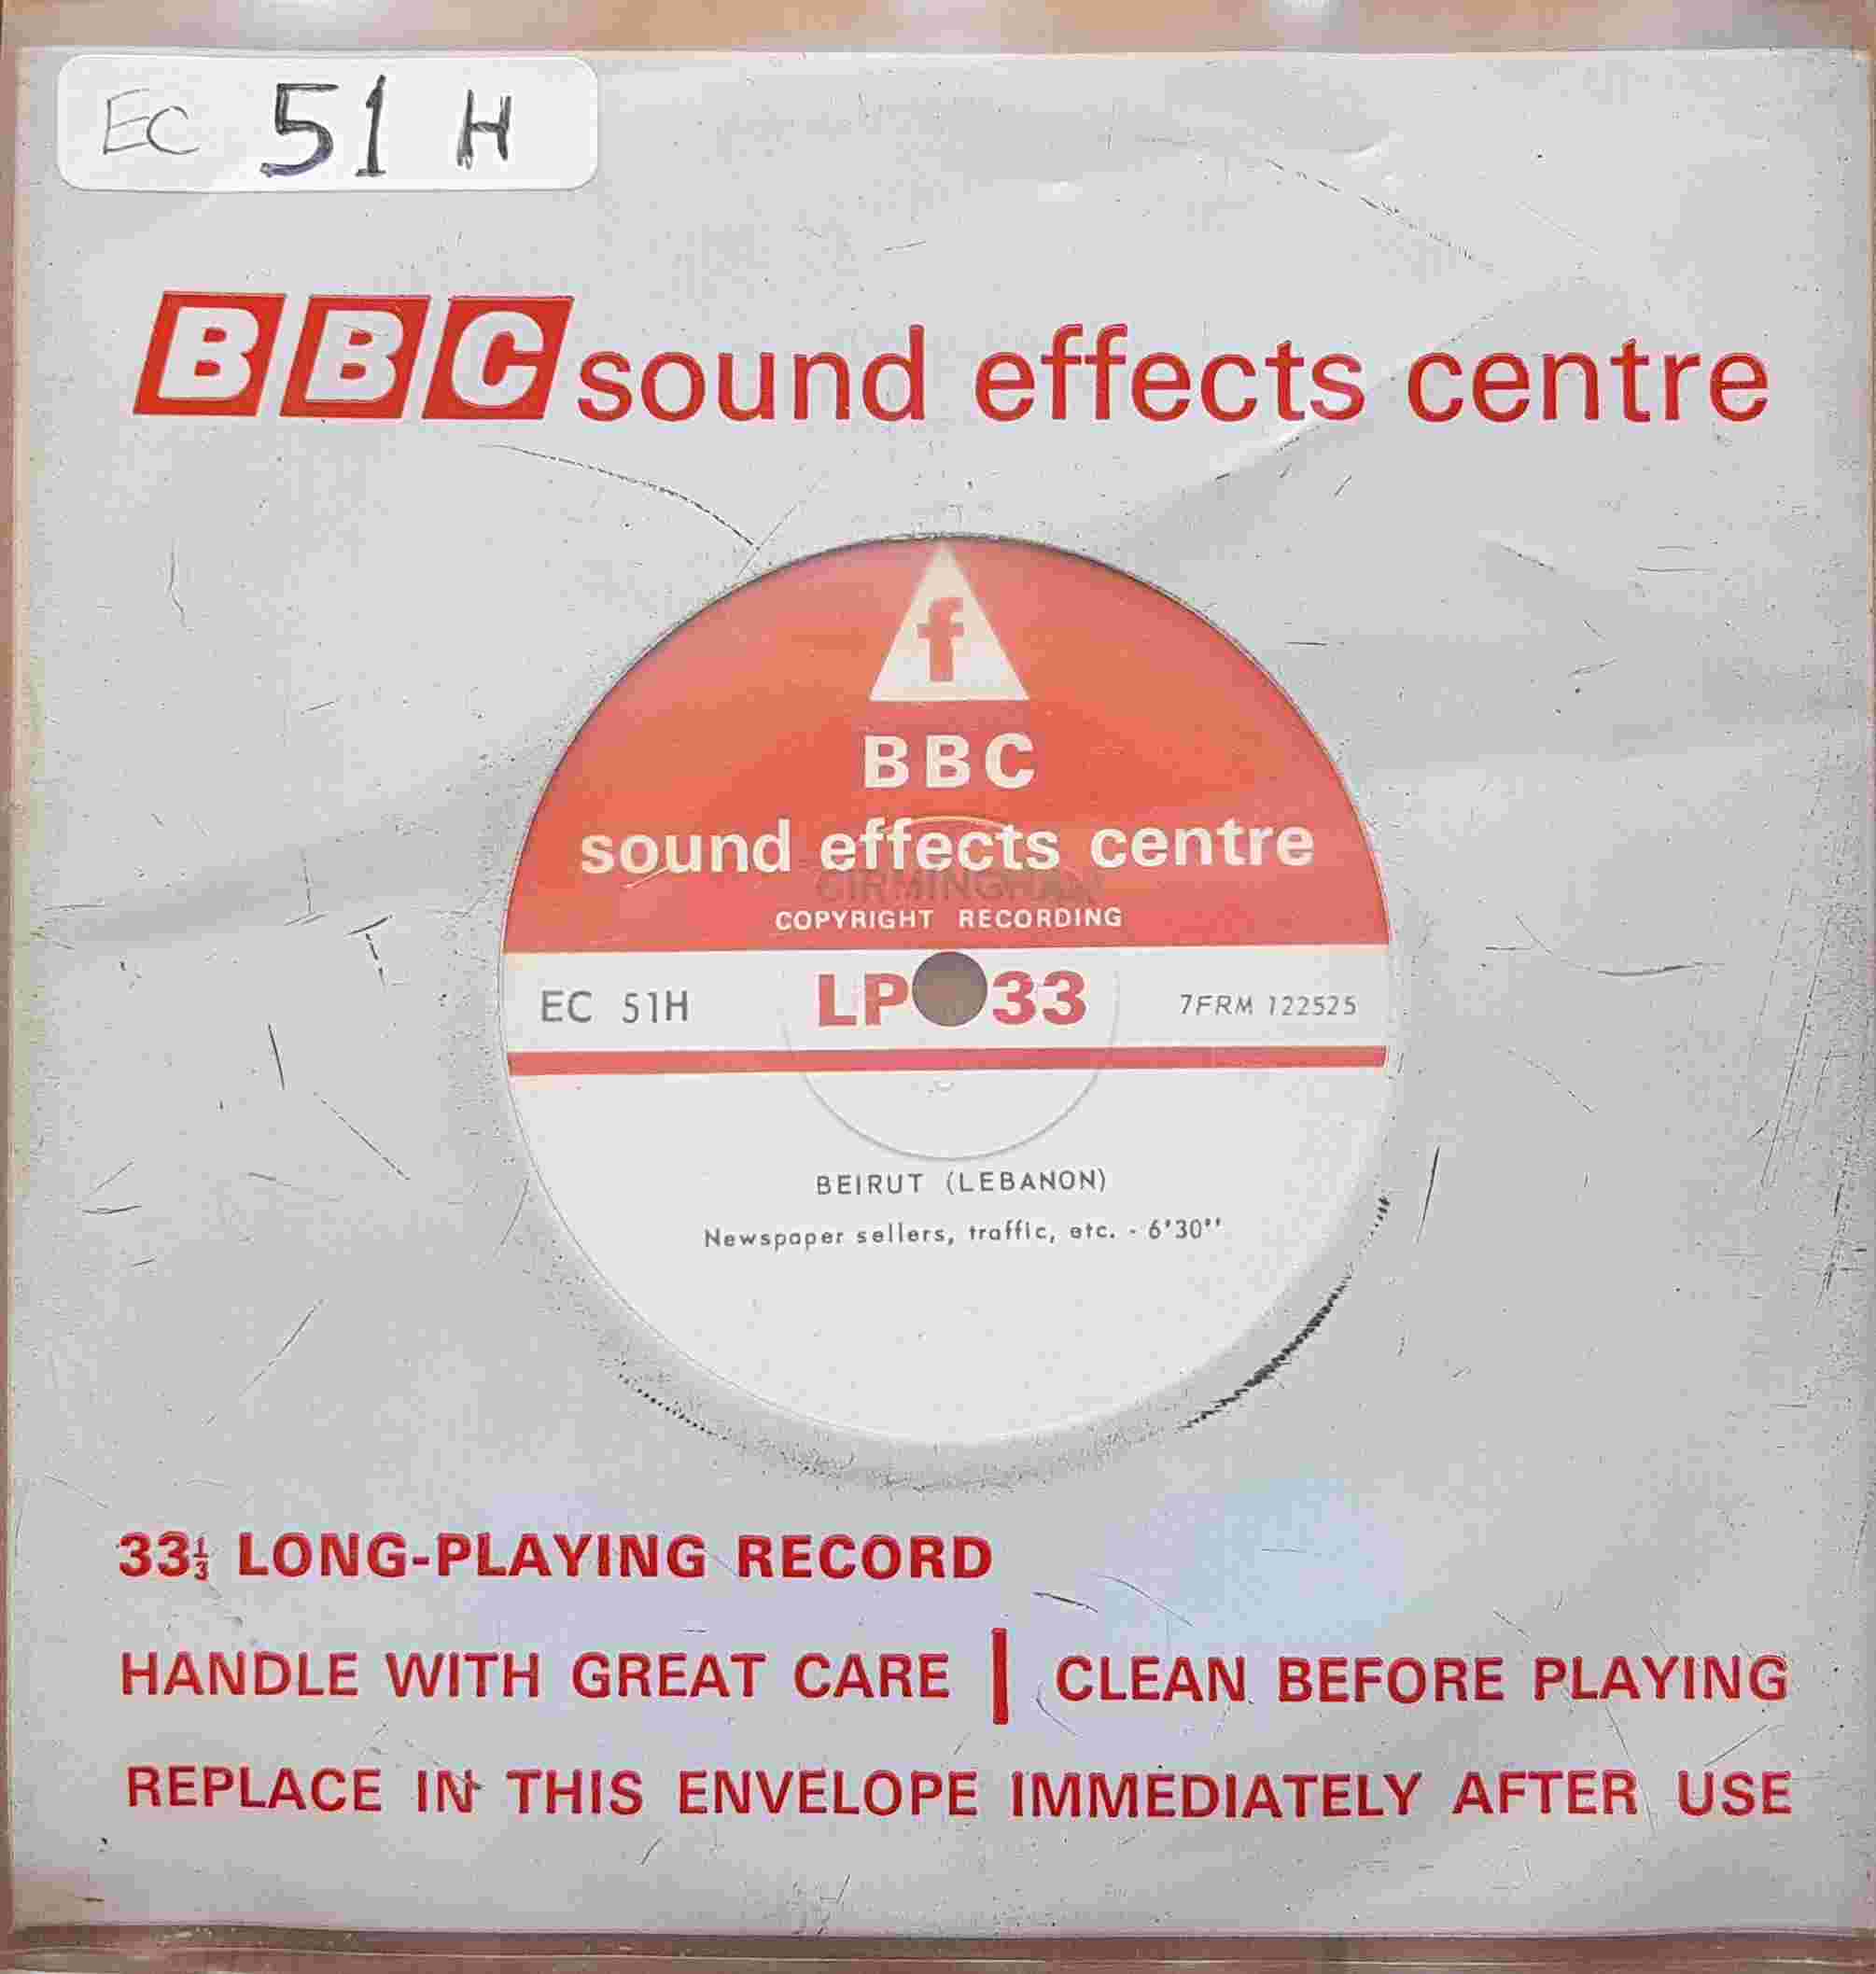 Picture of EC 51H Beirut (Lebanon) by artist Not registered from the BBC records and Tapes library